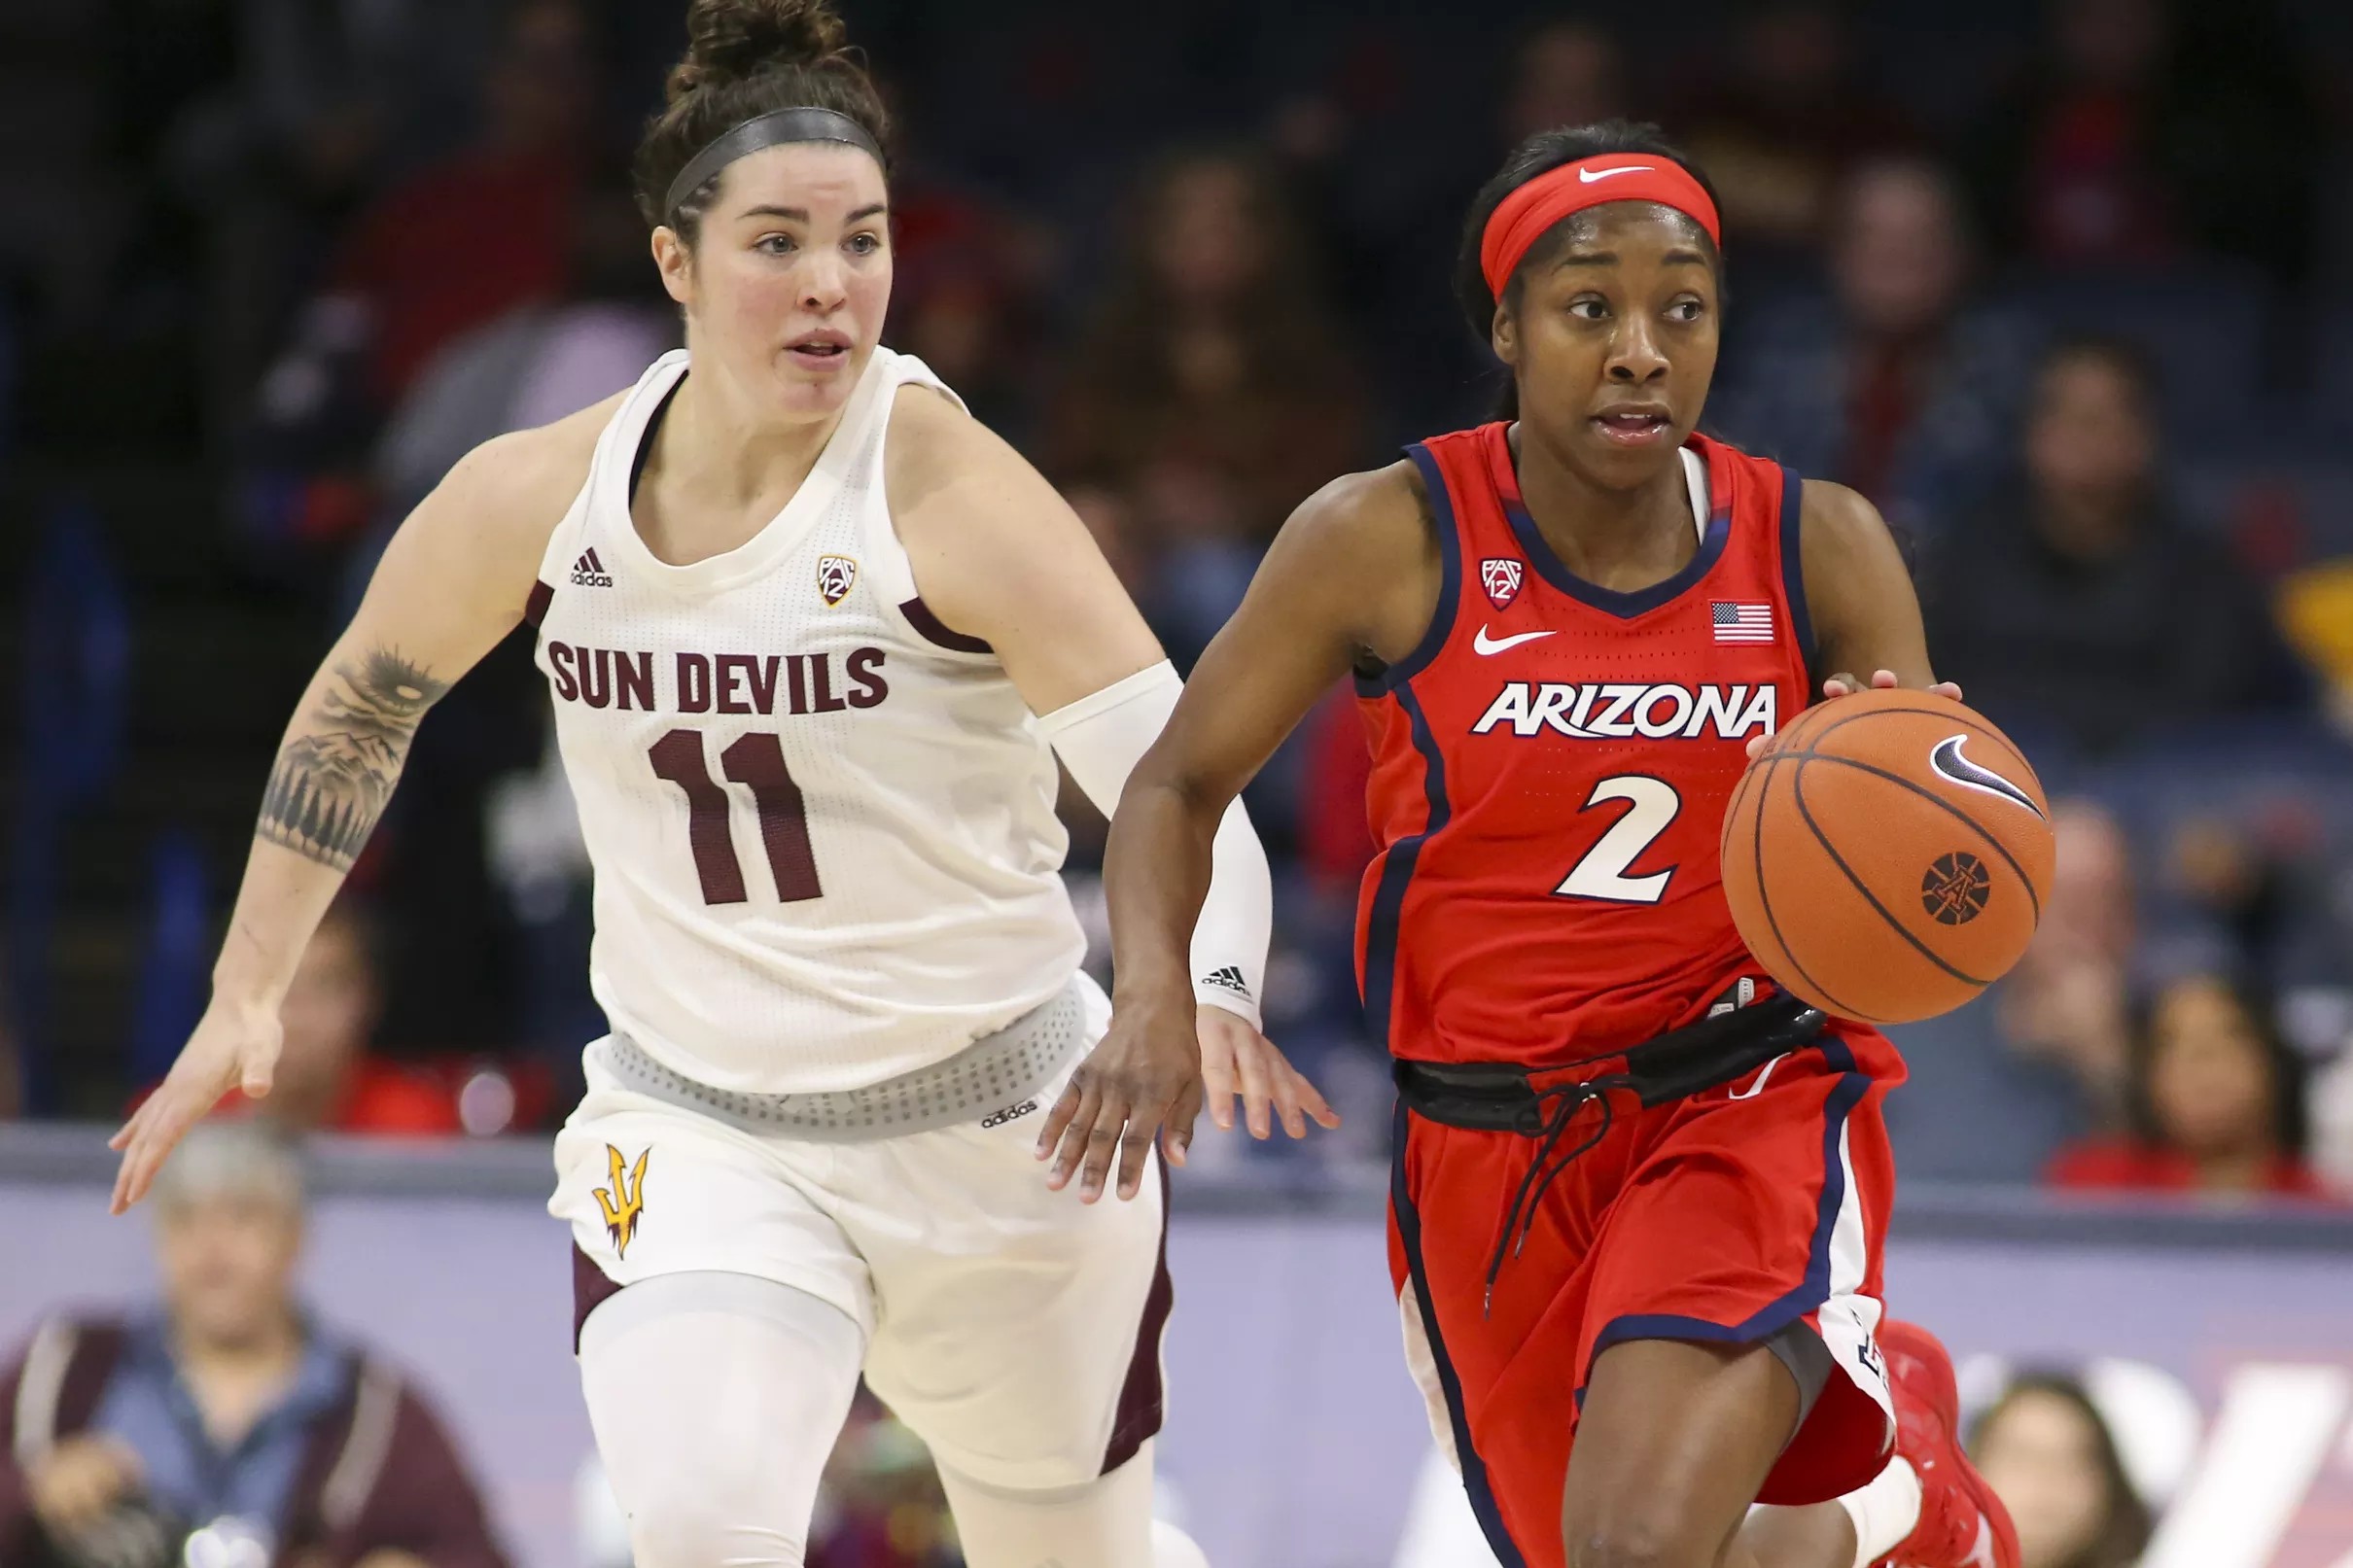 Arizona women’s basketball’s Pac-12 schedule is out, but non-conference